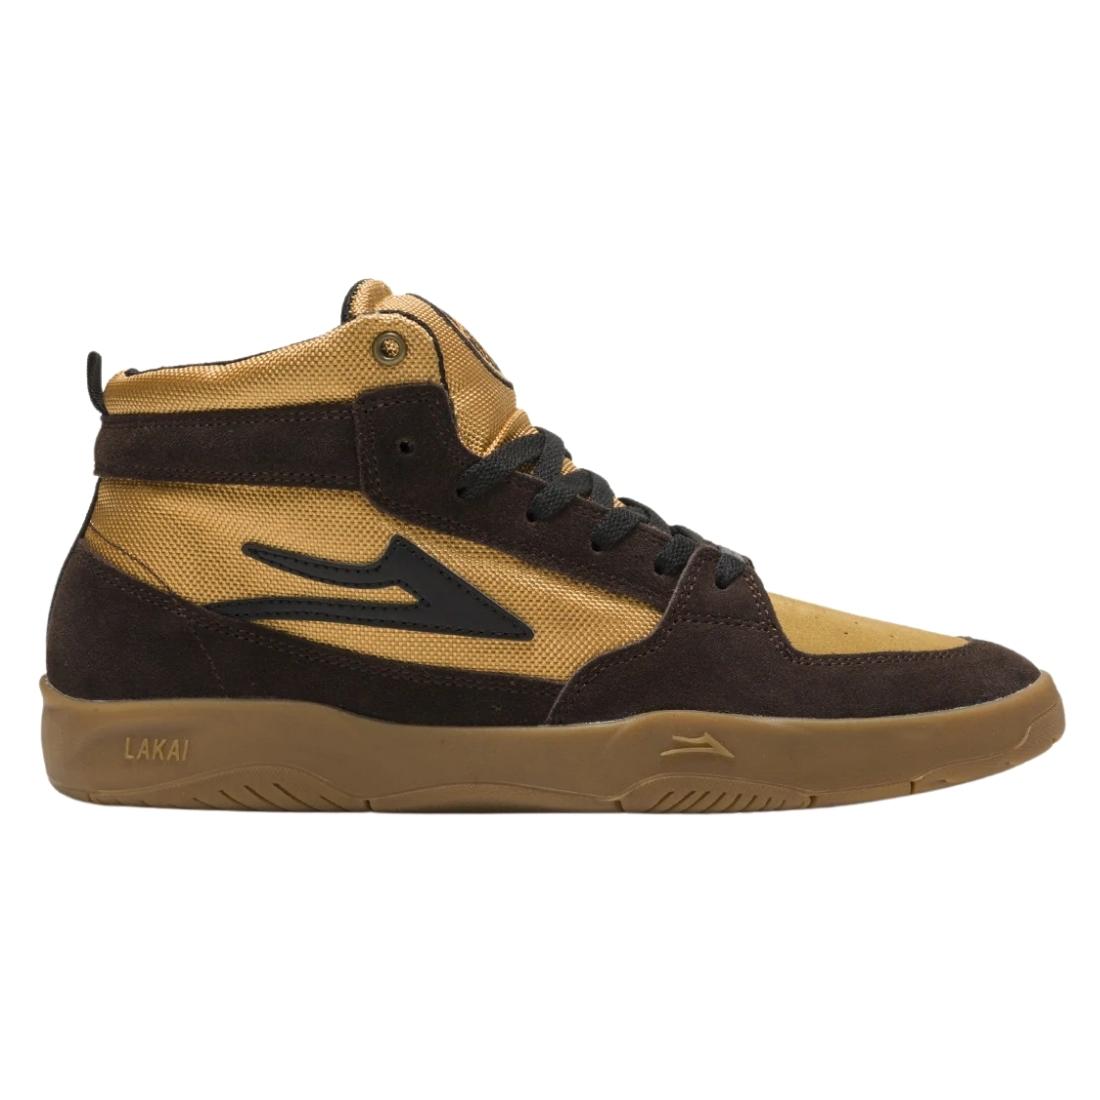 Lakai Trudger Mid Top Skate Shoes - Chocolate/Gum Suede - Mens High Top Trainers by Lakai